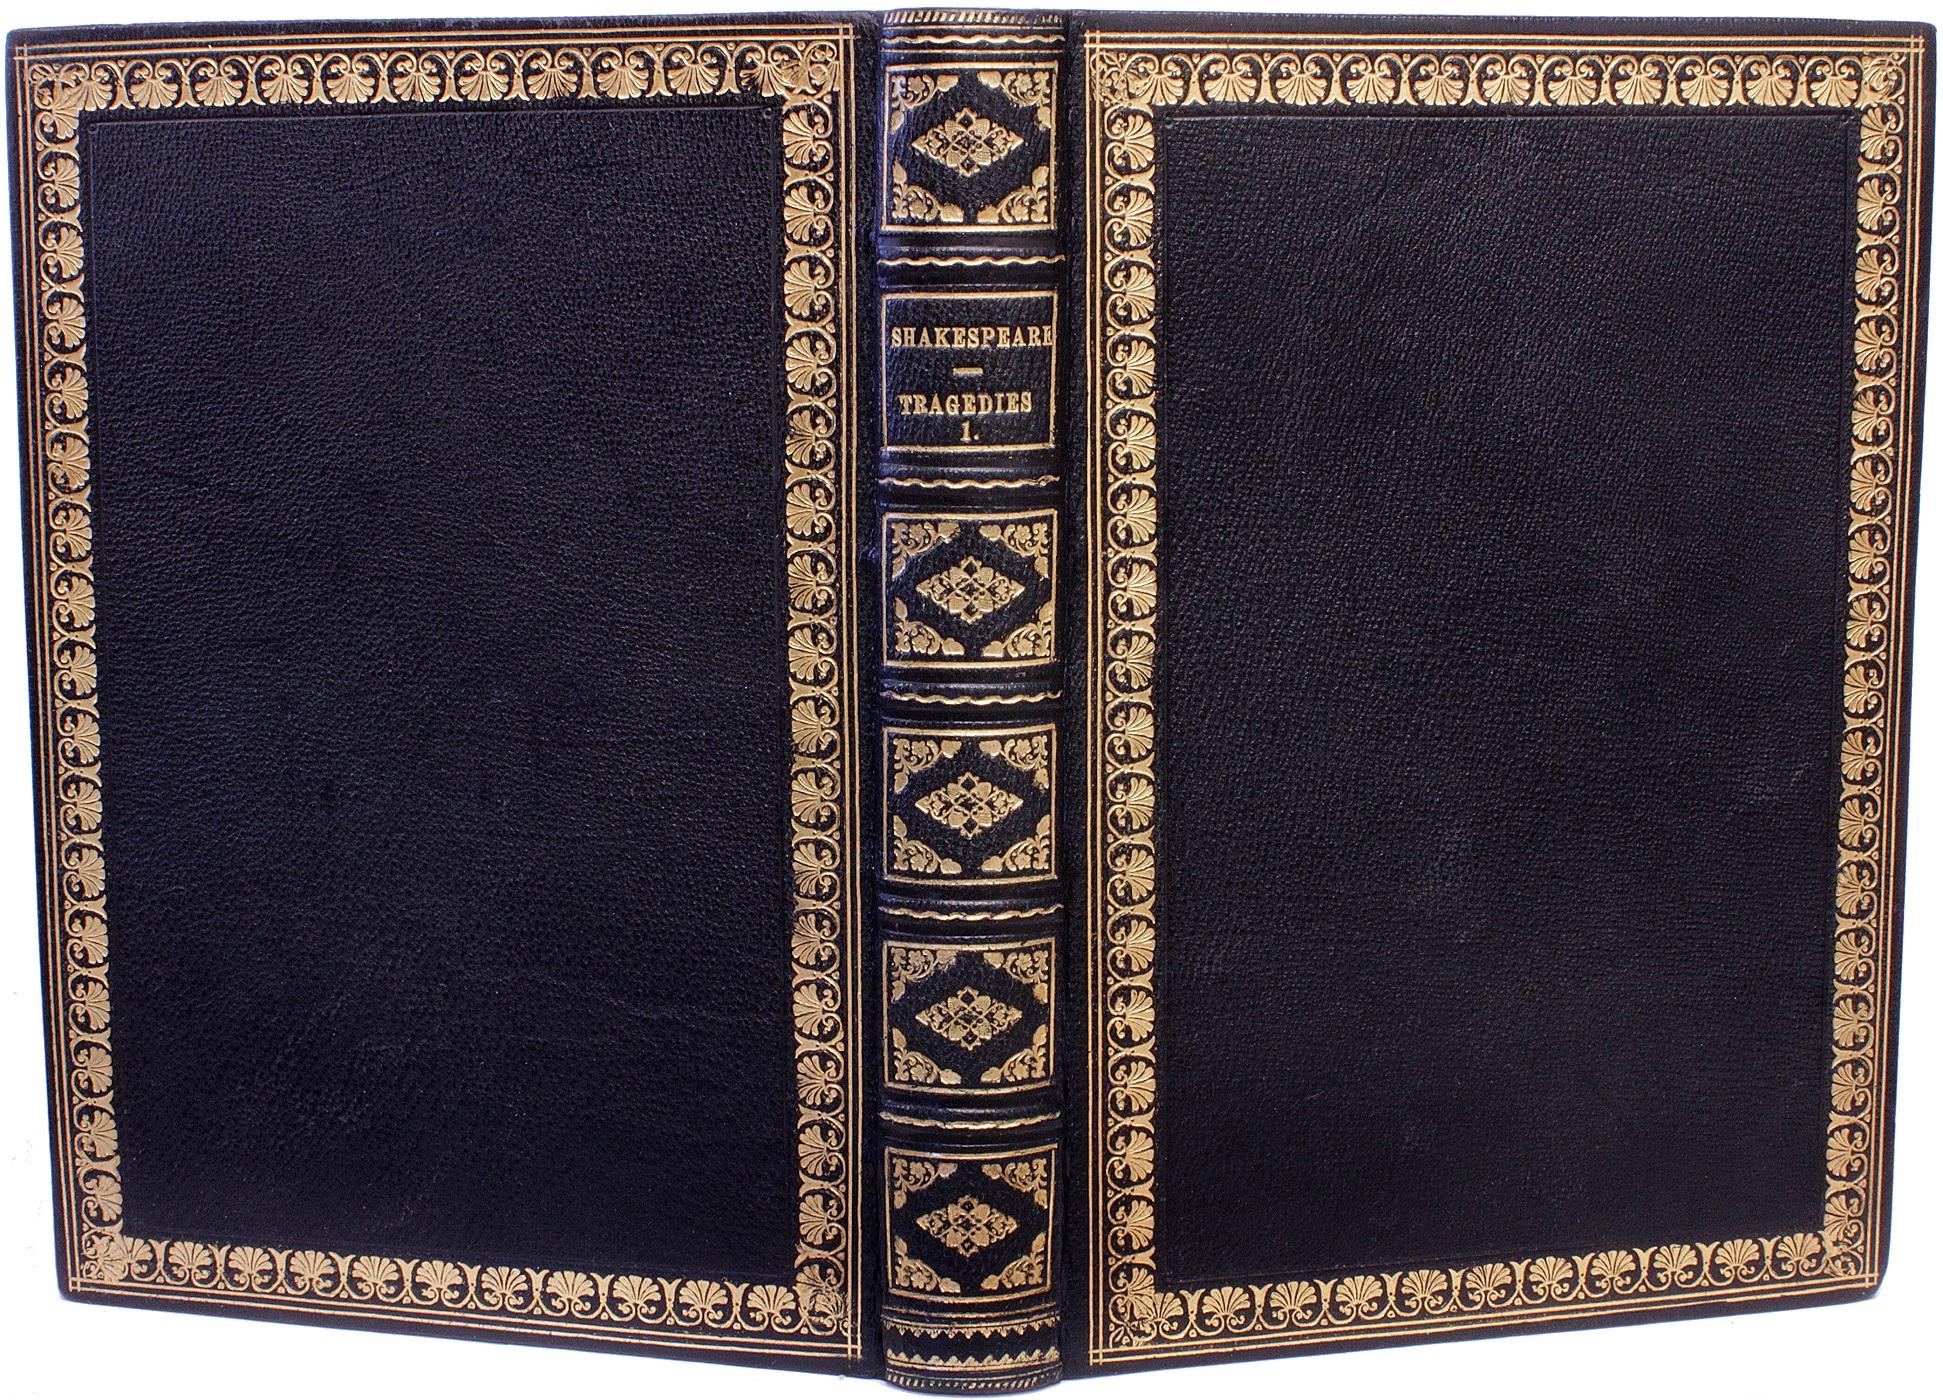 British Pictorial Edition - Works Of William Shakespeare - 8 vols. IN FULL LEATHER